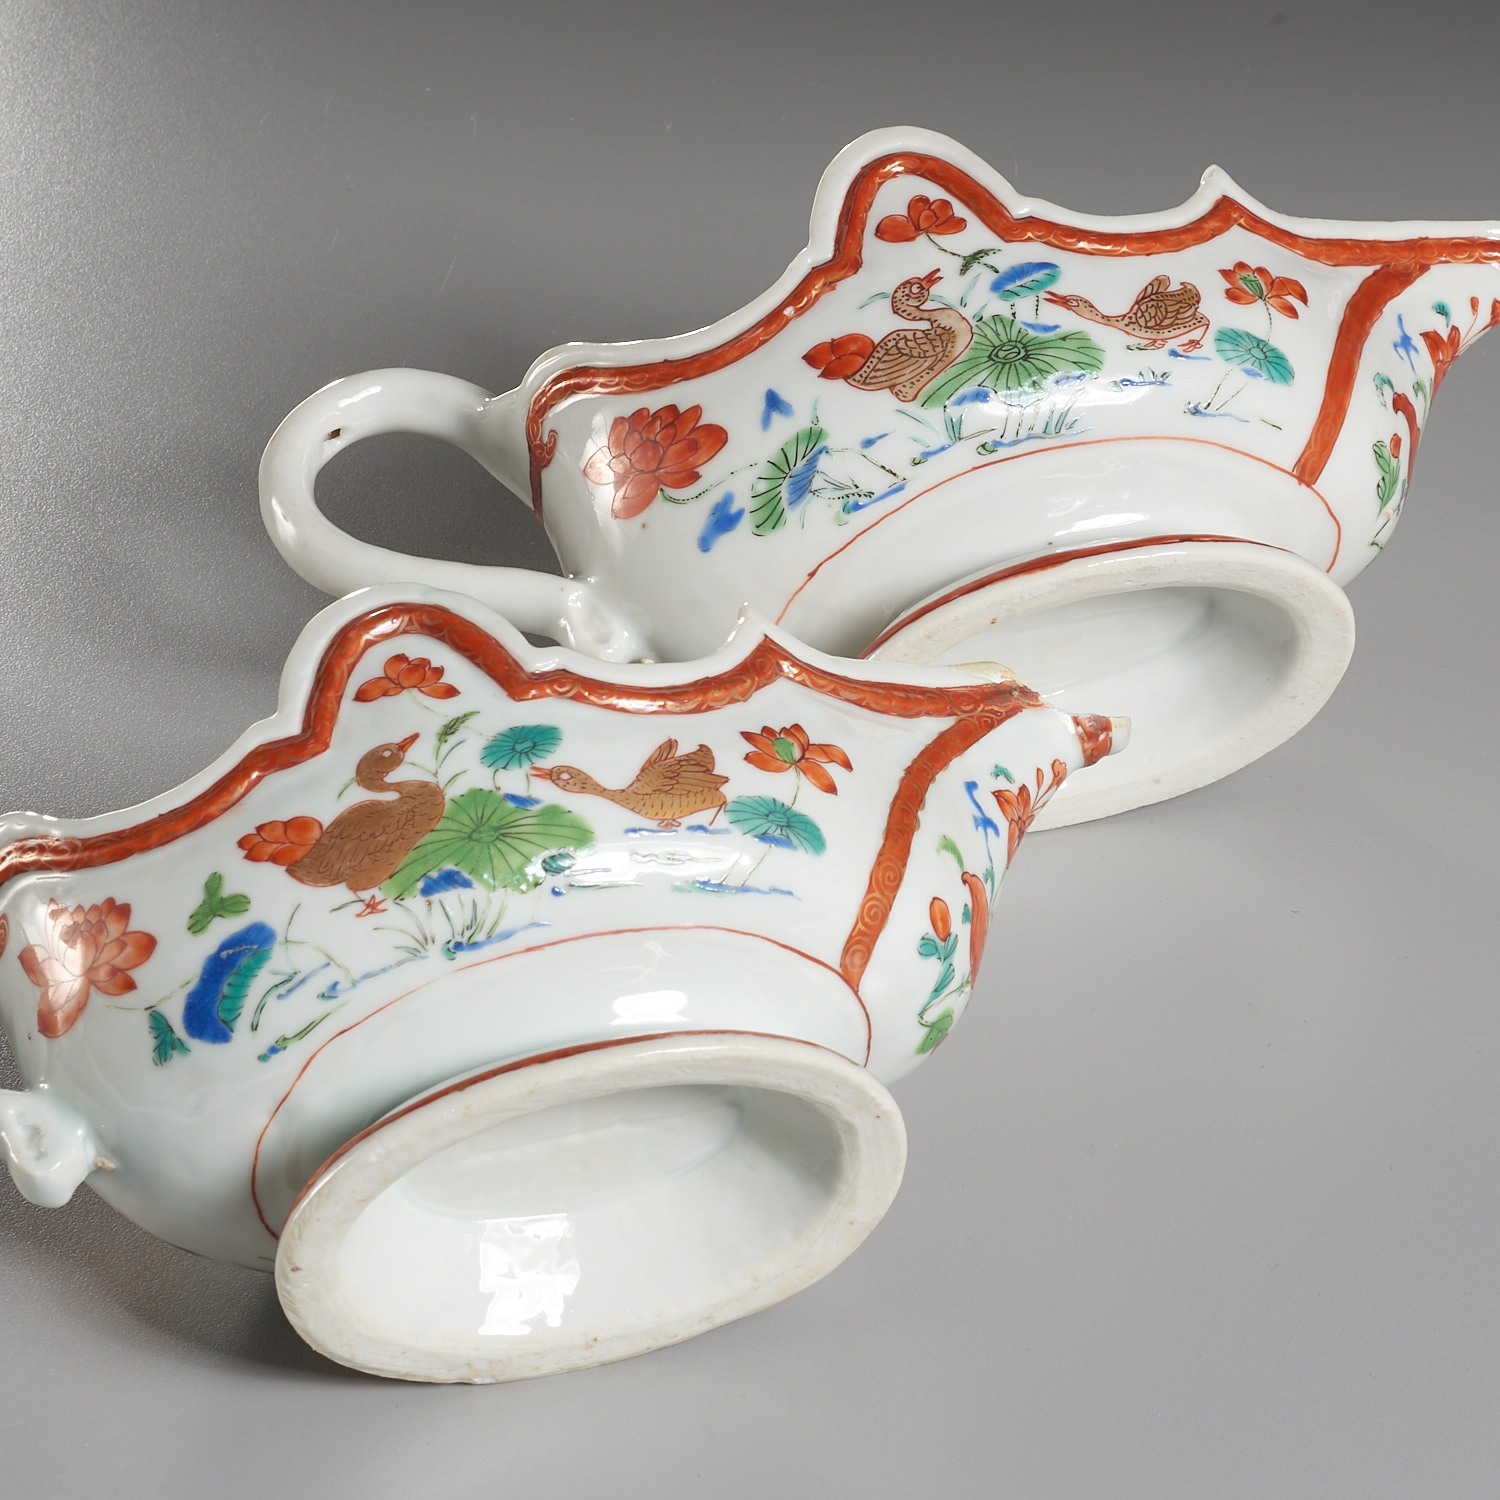 Pair Chinese Export porcelain sauceboats - Image 6 of 7